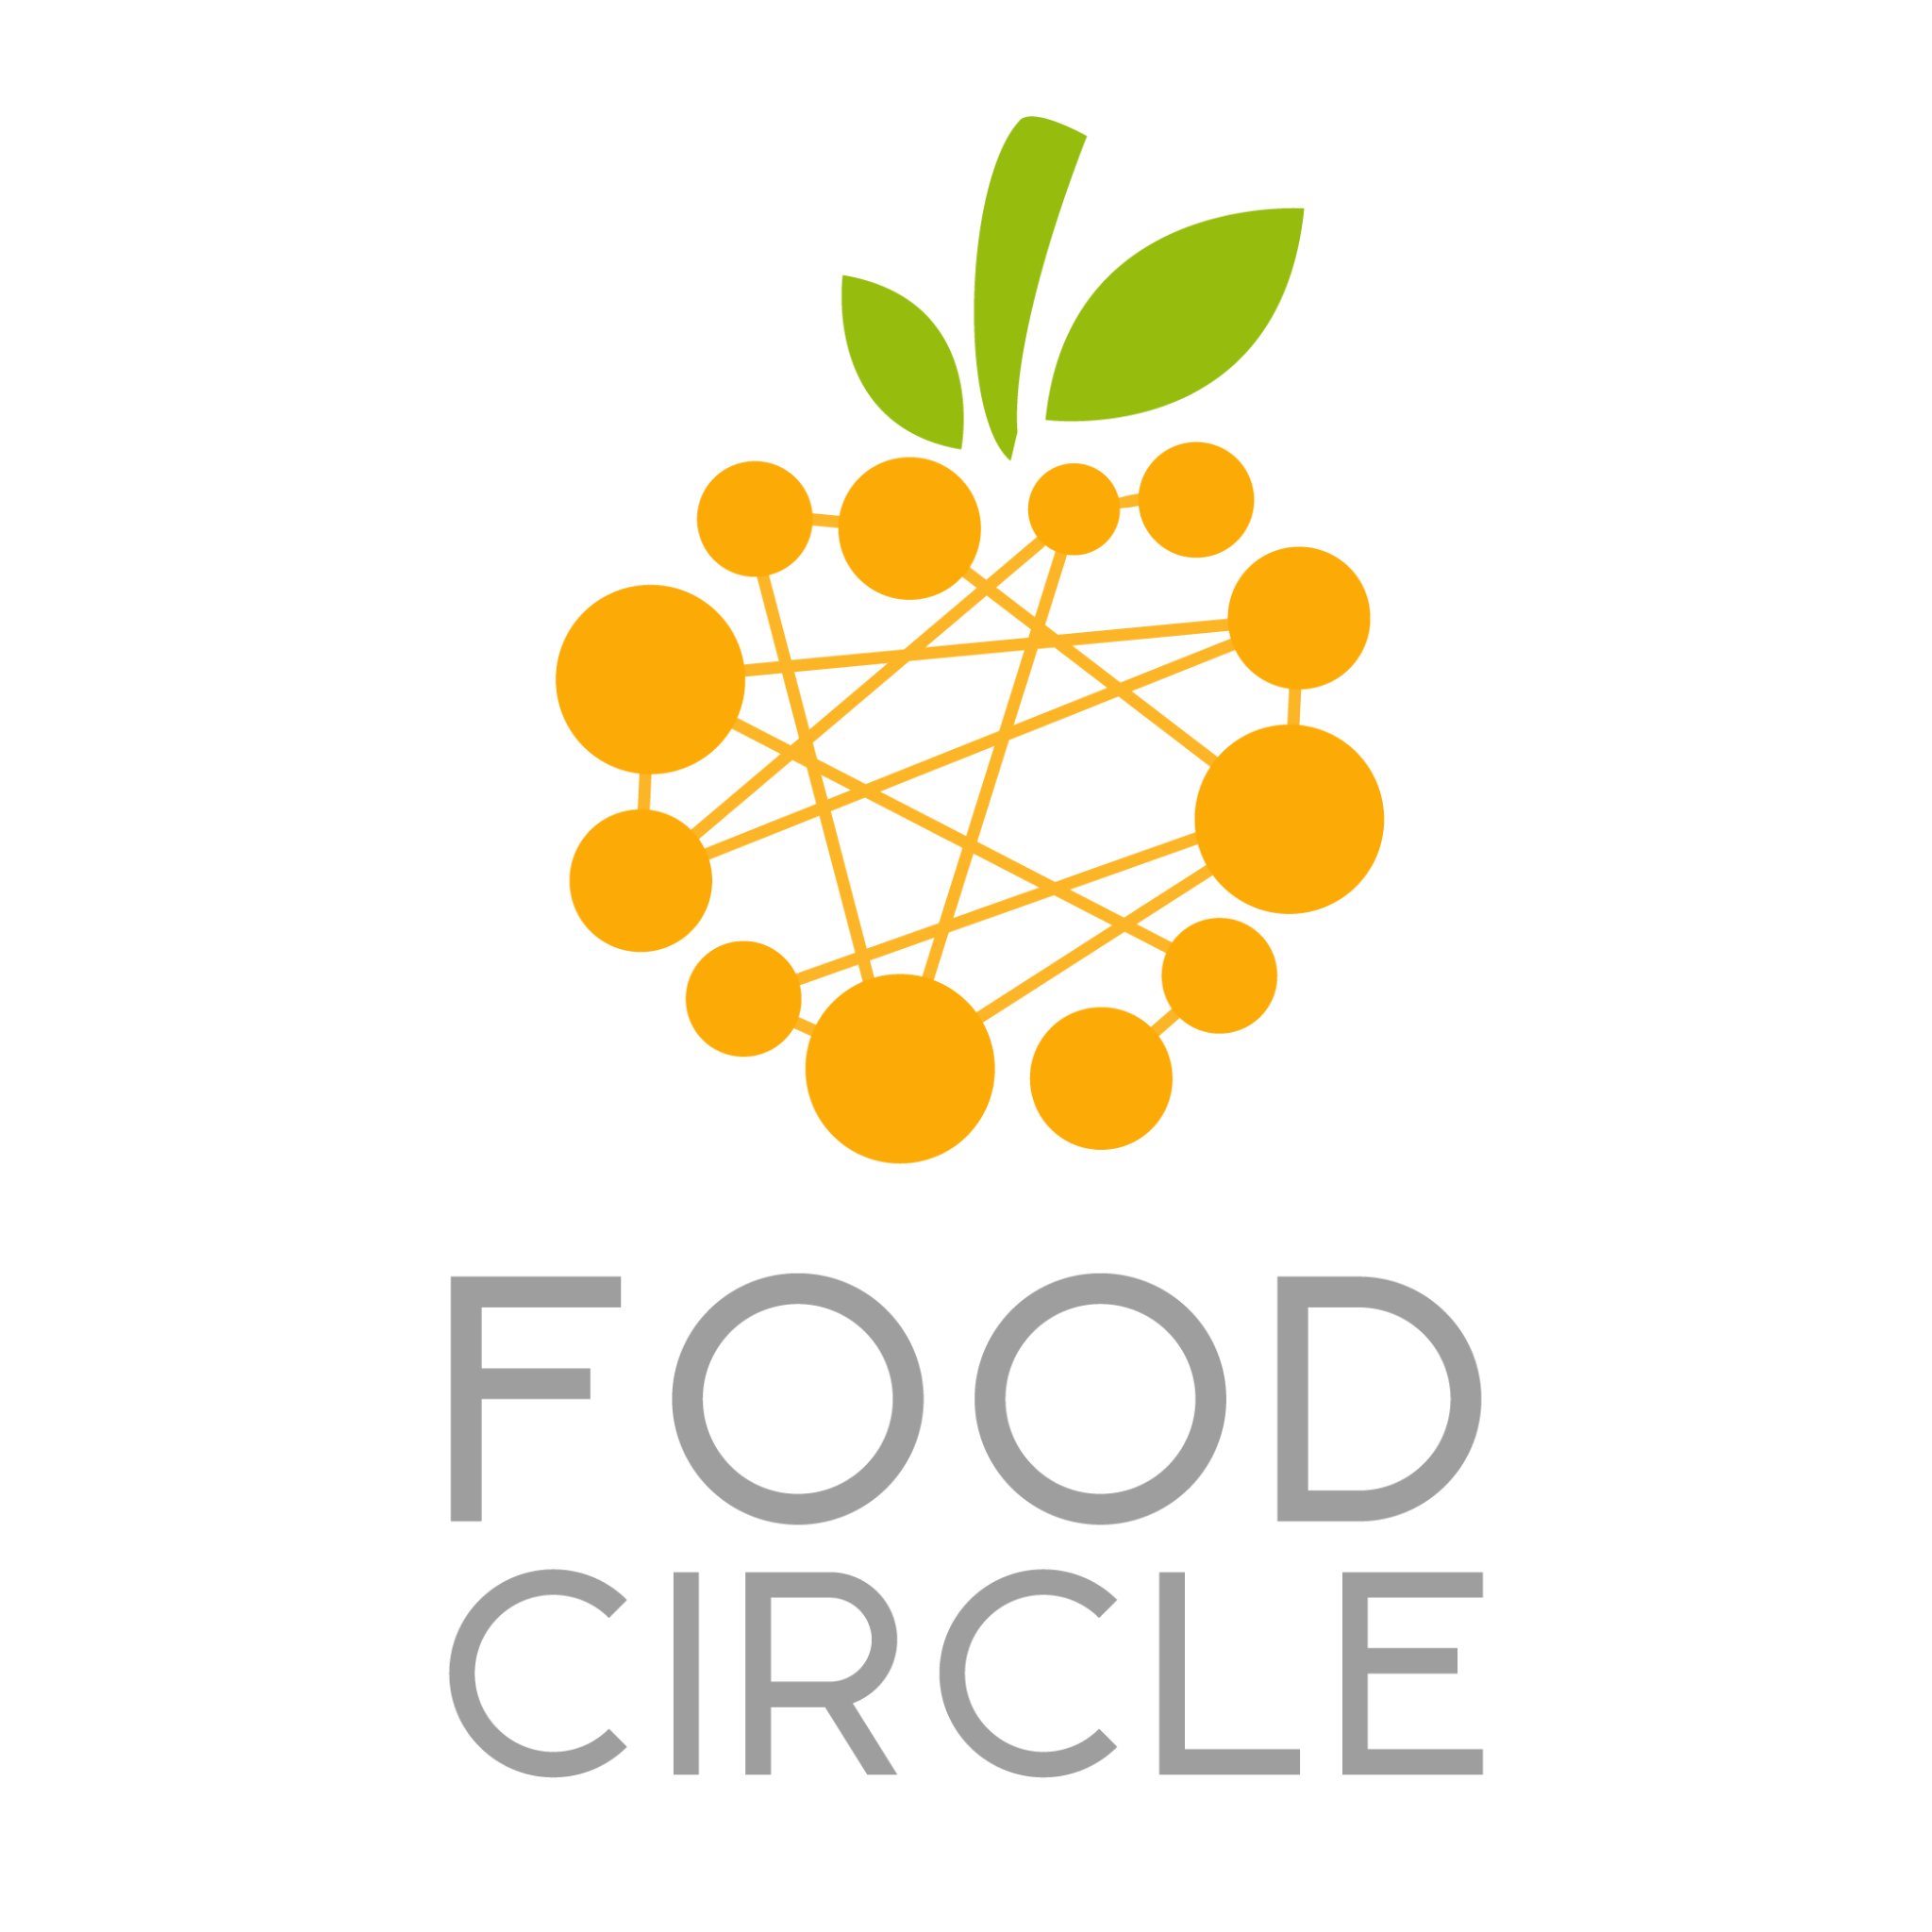 Our mission: increase the impact of food surplus initiatives & collaborate to tackle food waste.